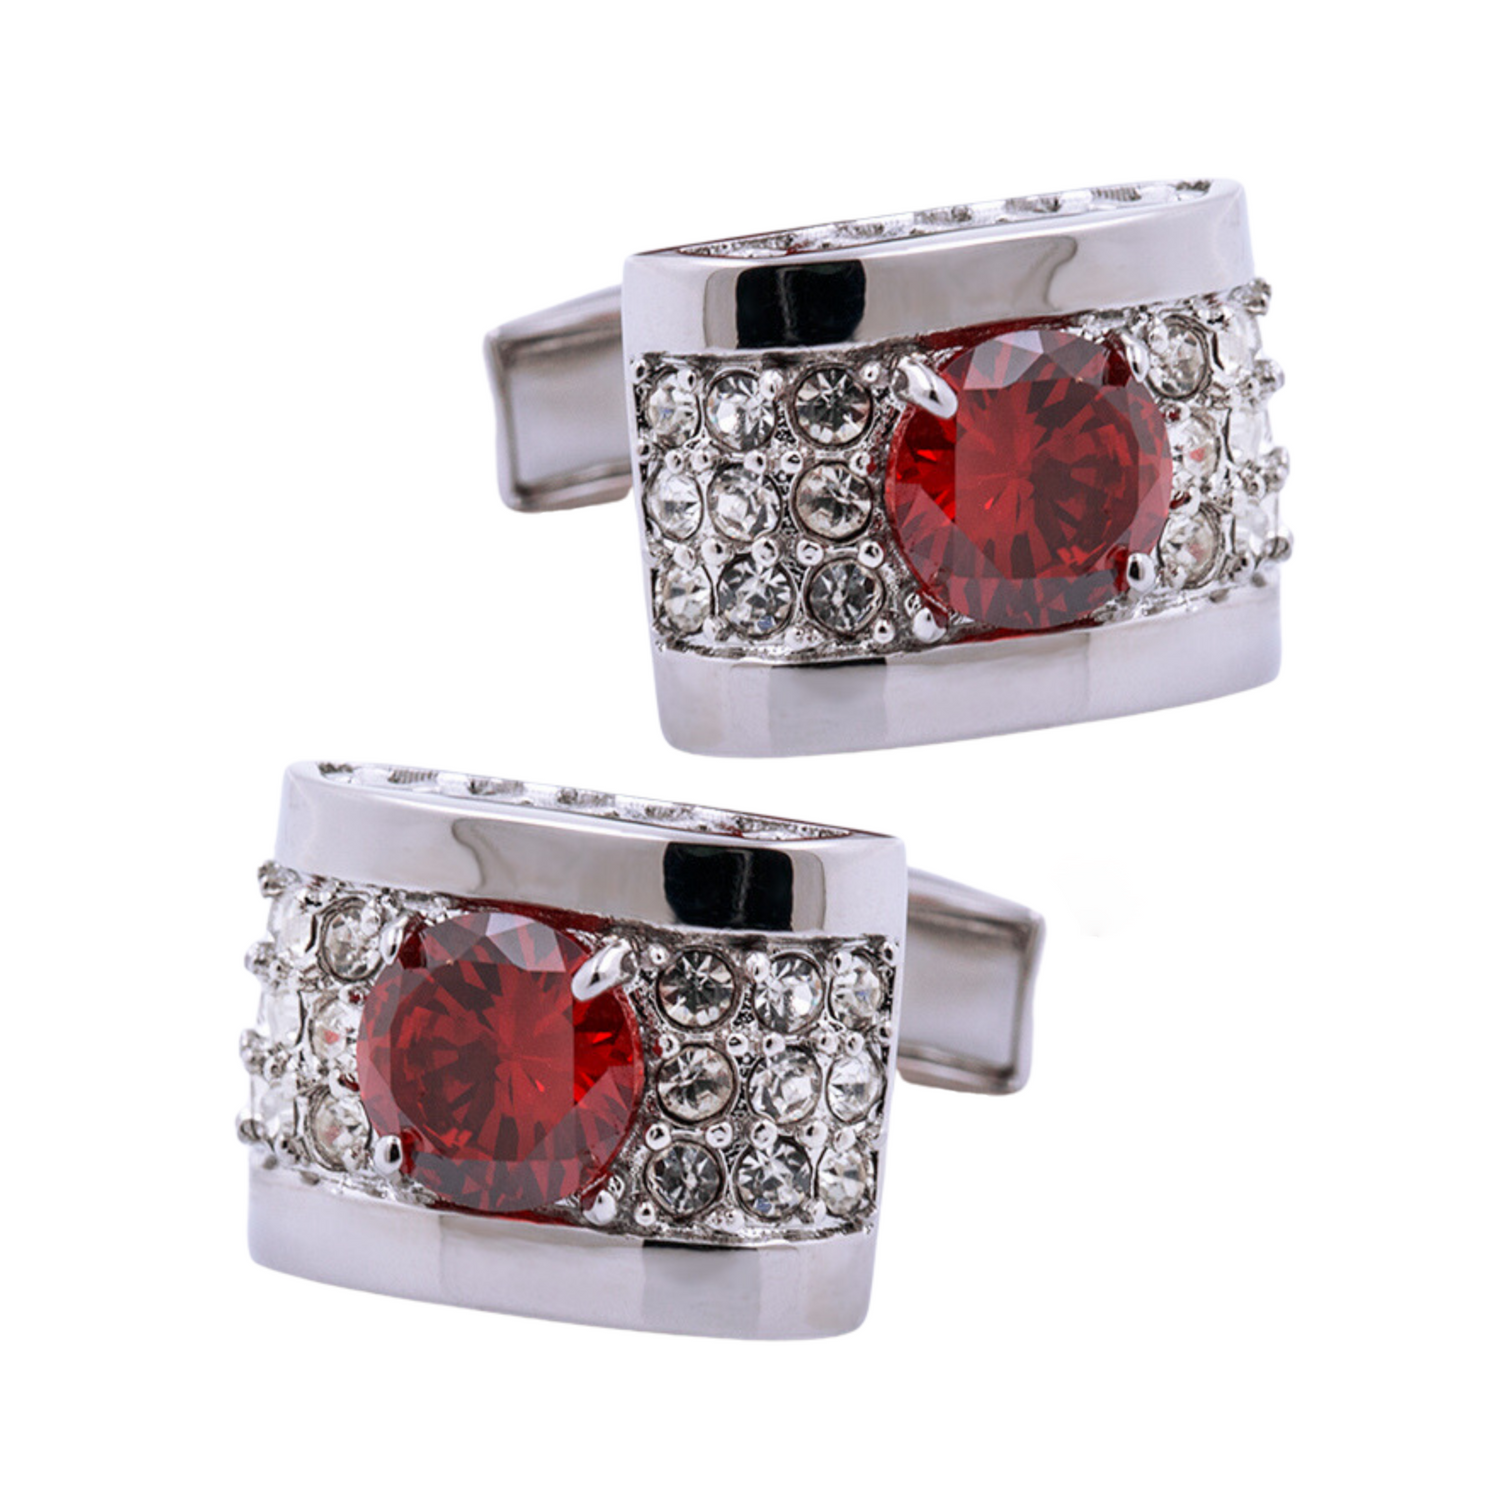 Chrome with Red and Clear Stones Cufflinks